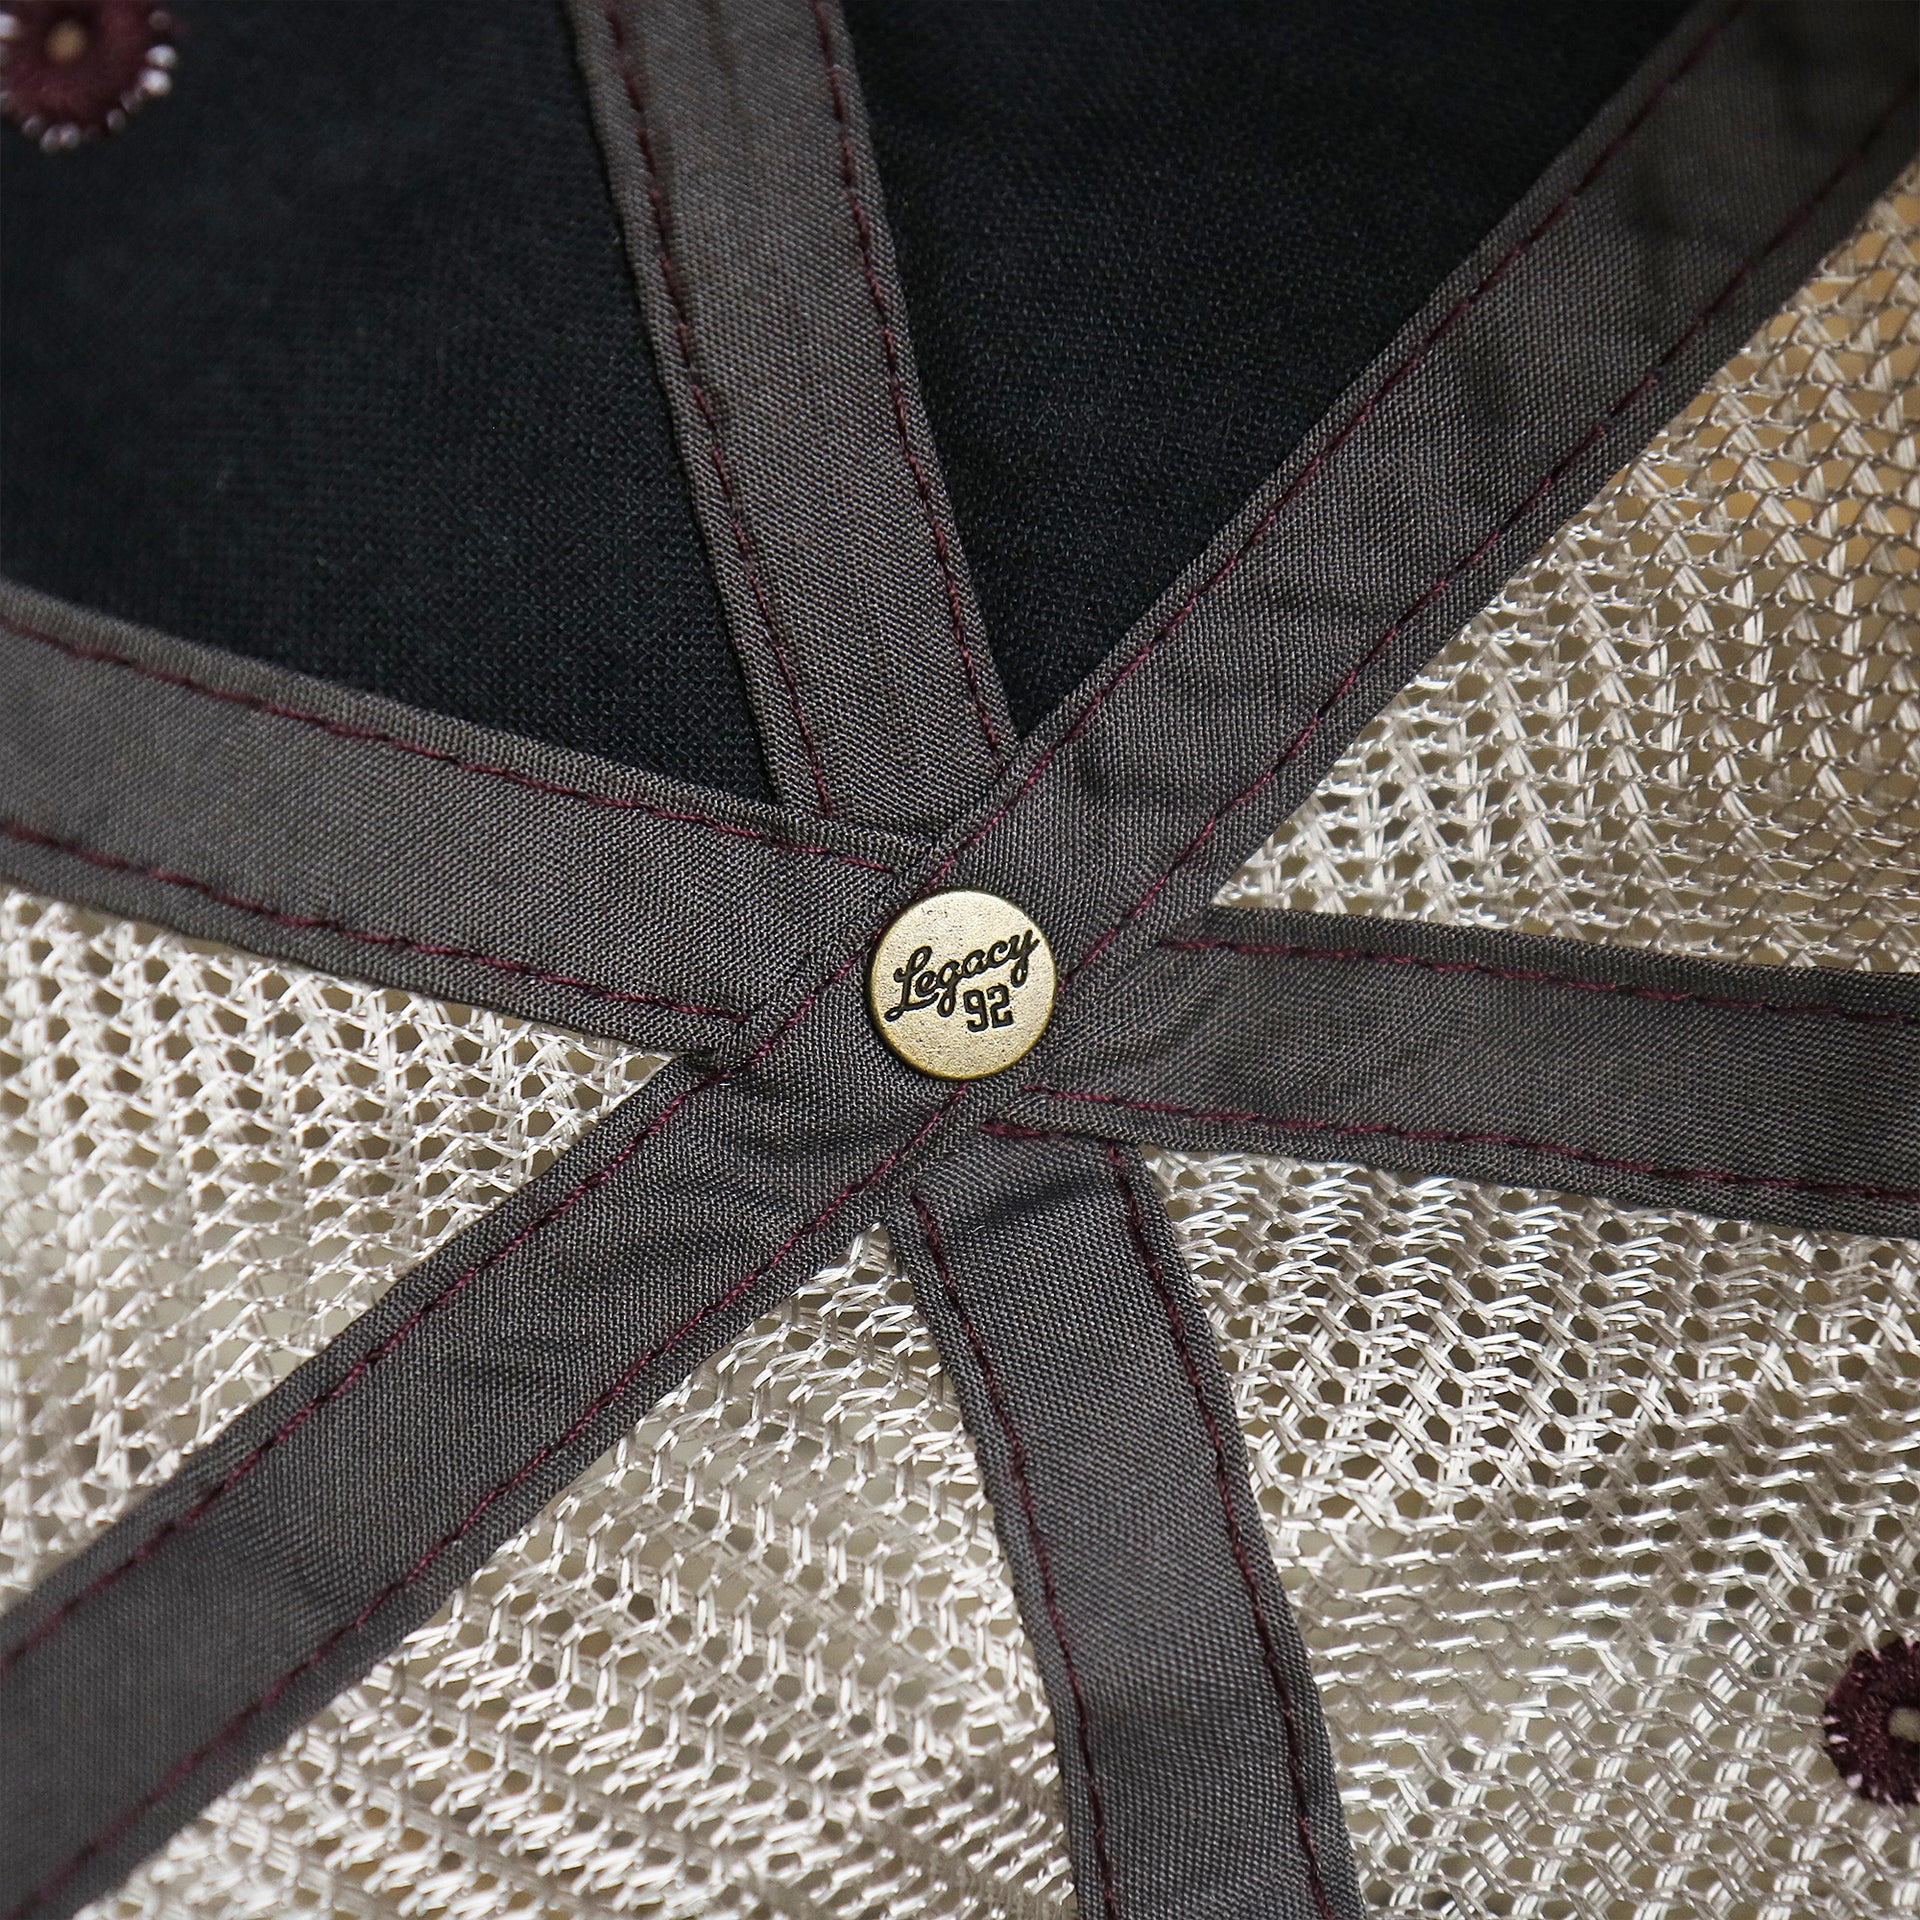 The Legacy Engraved Button on the OCNJ 1879 Ocean City New Jersey Wave Trucker Hat | Burgundy And Khaki Mesh Trucker Hat